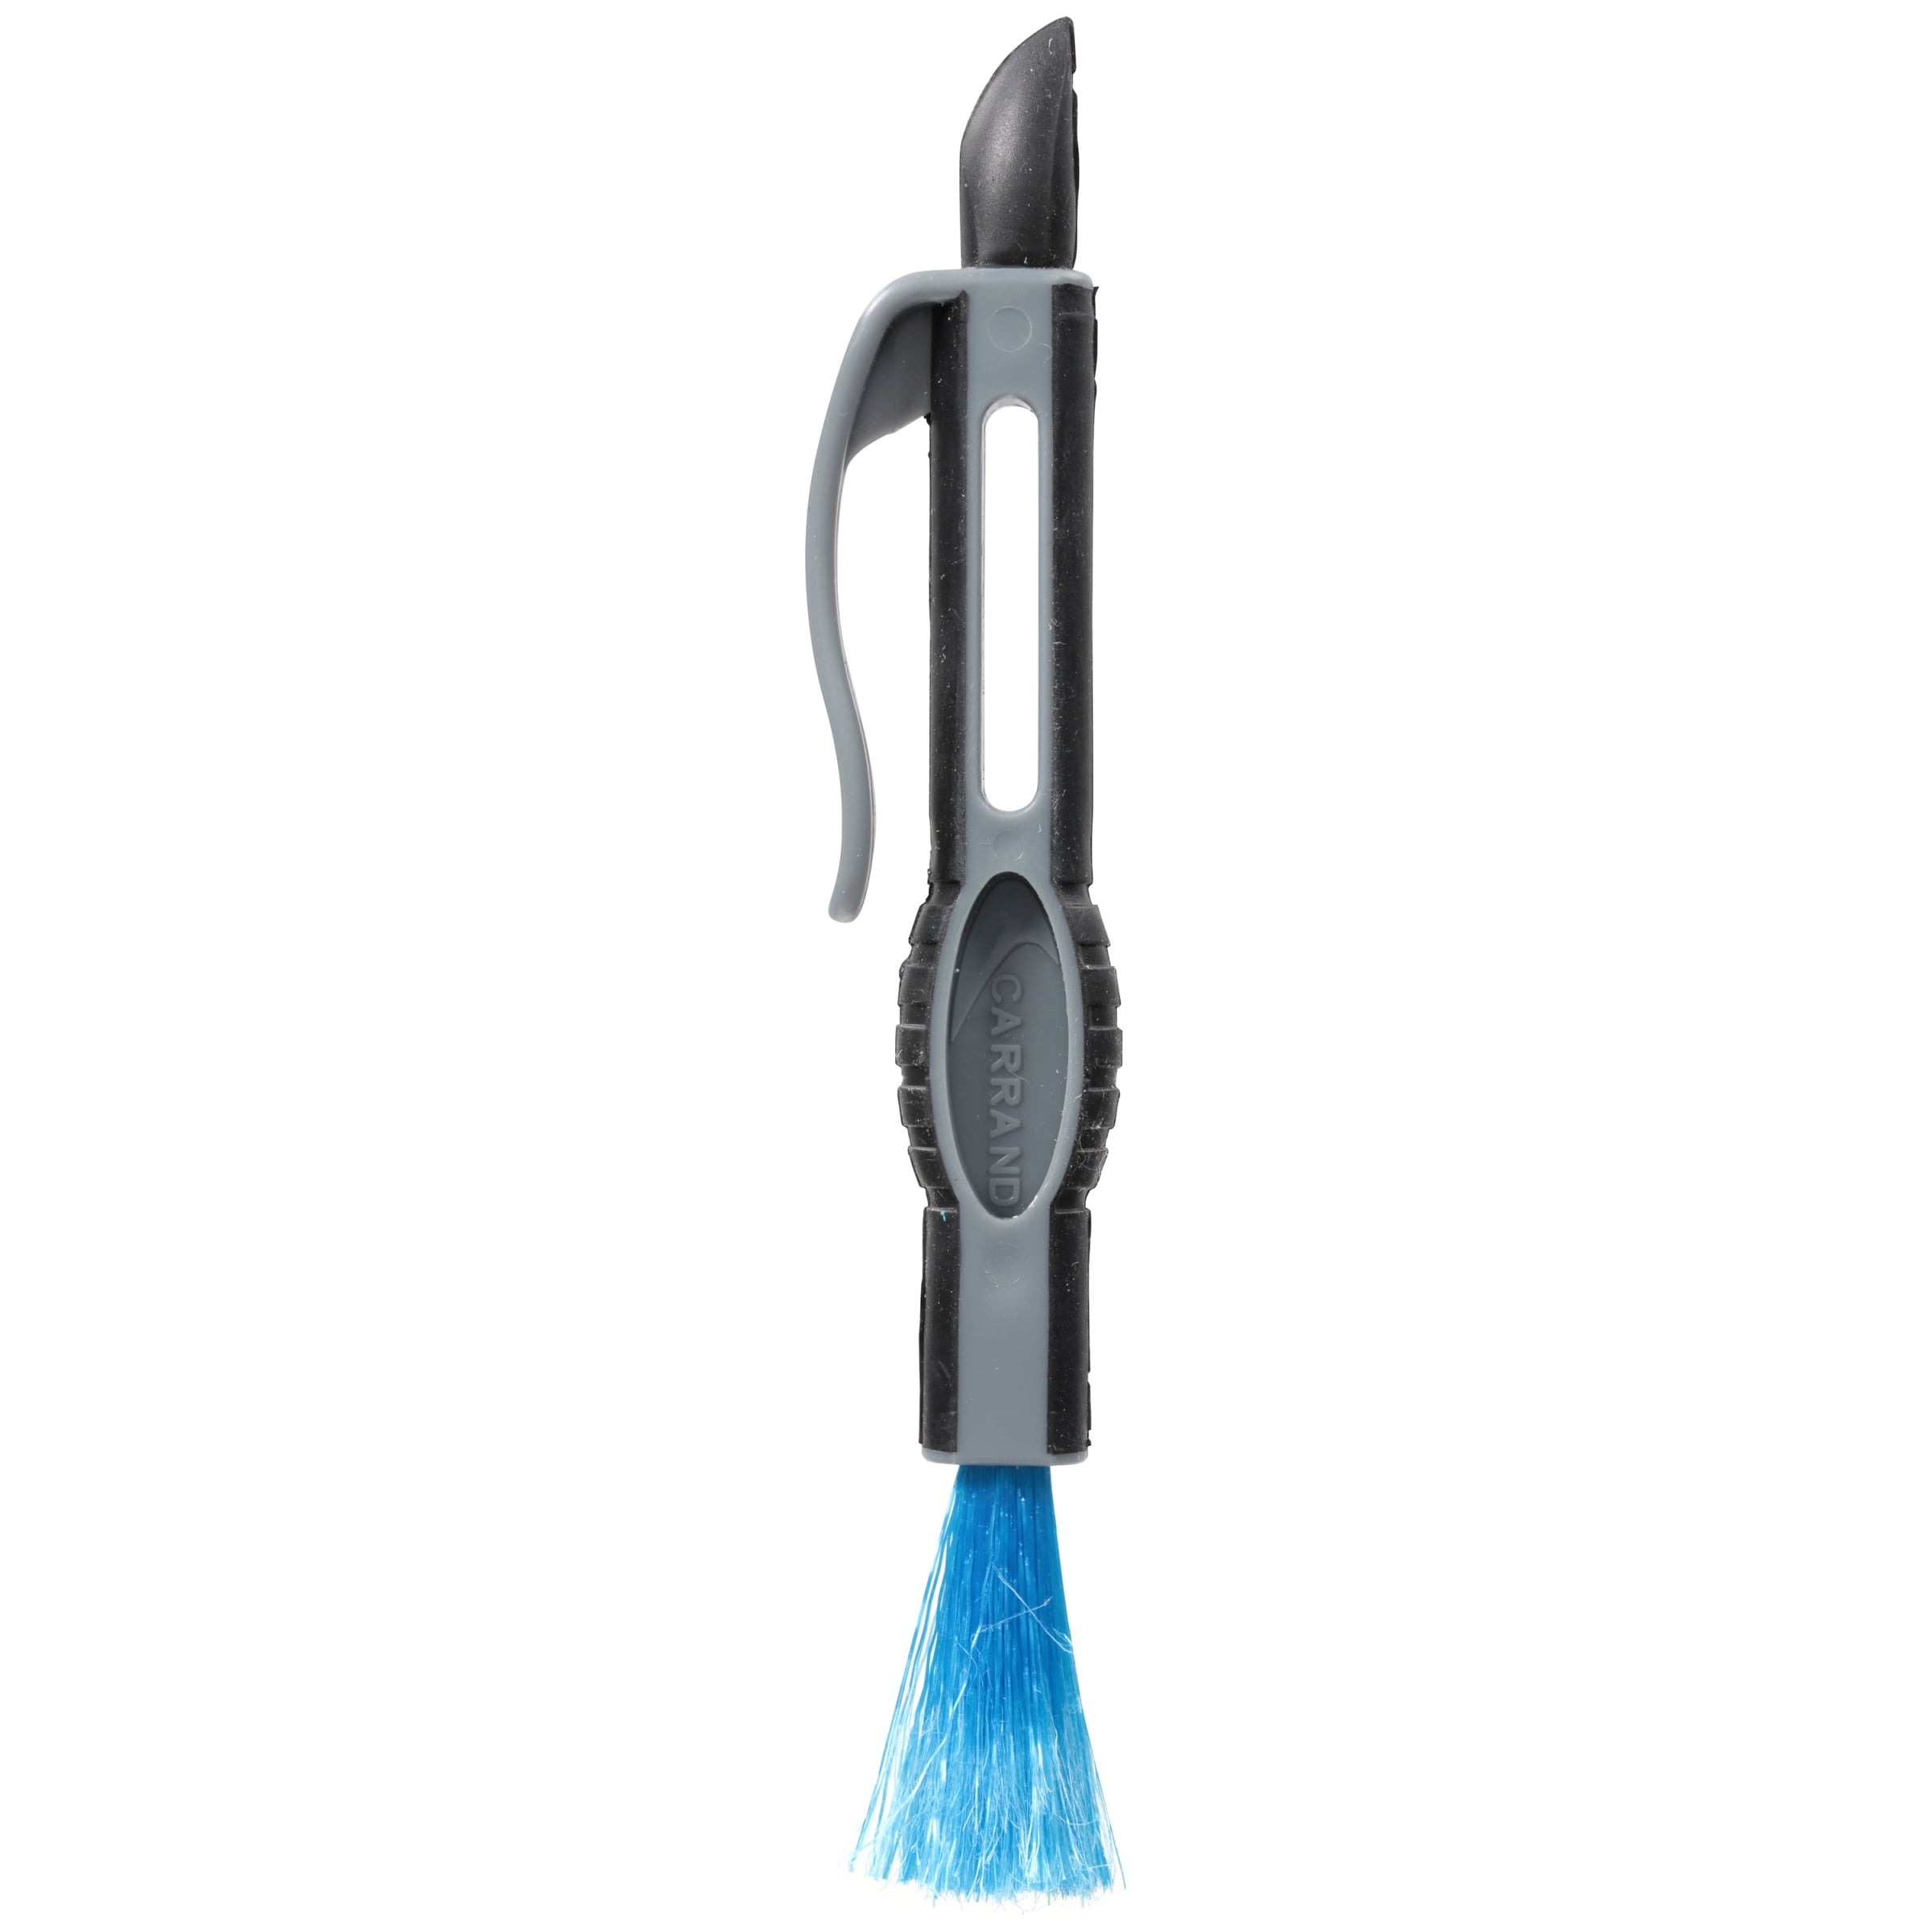 Carrand 2-in-1 Detail Brush Carded Pack - Walmart.com